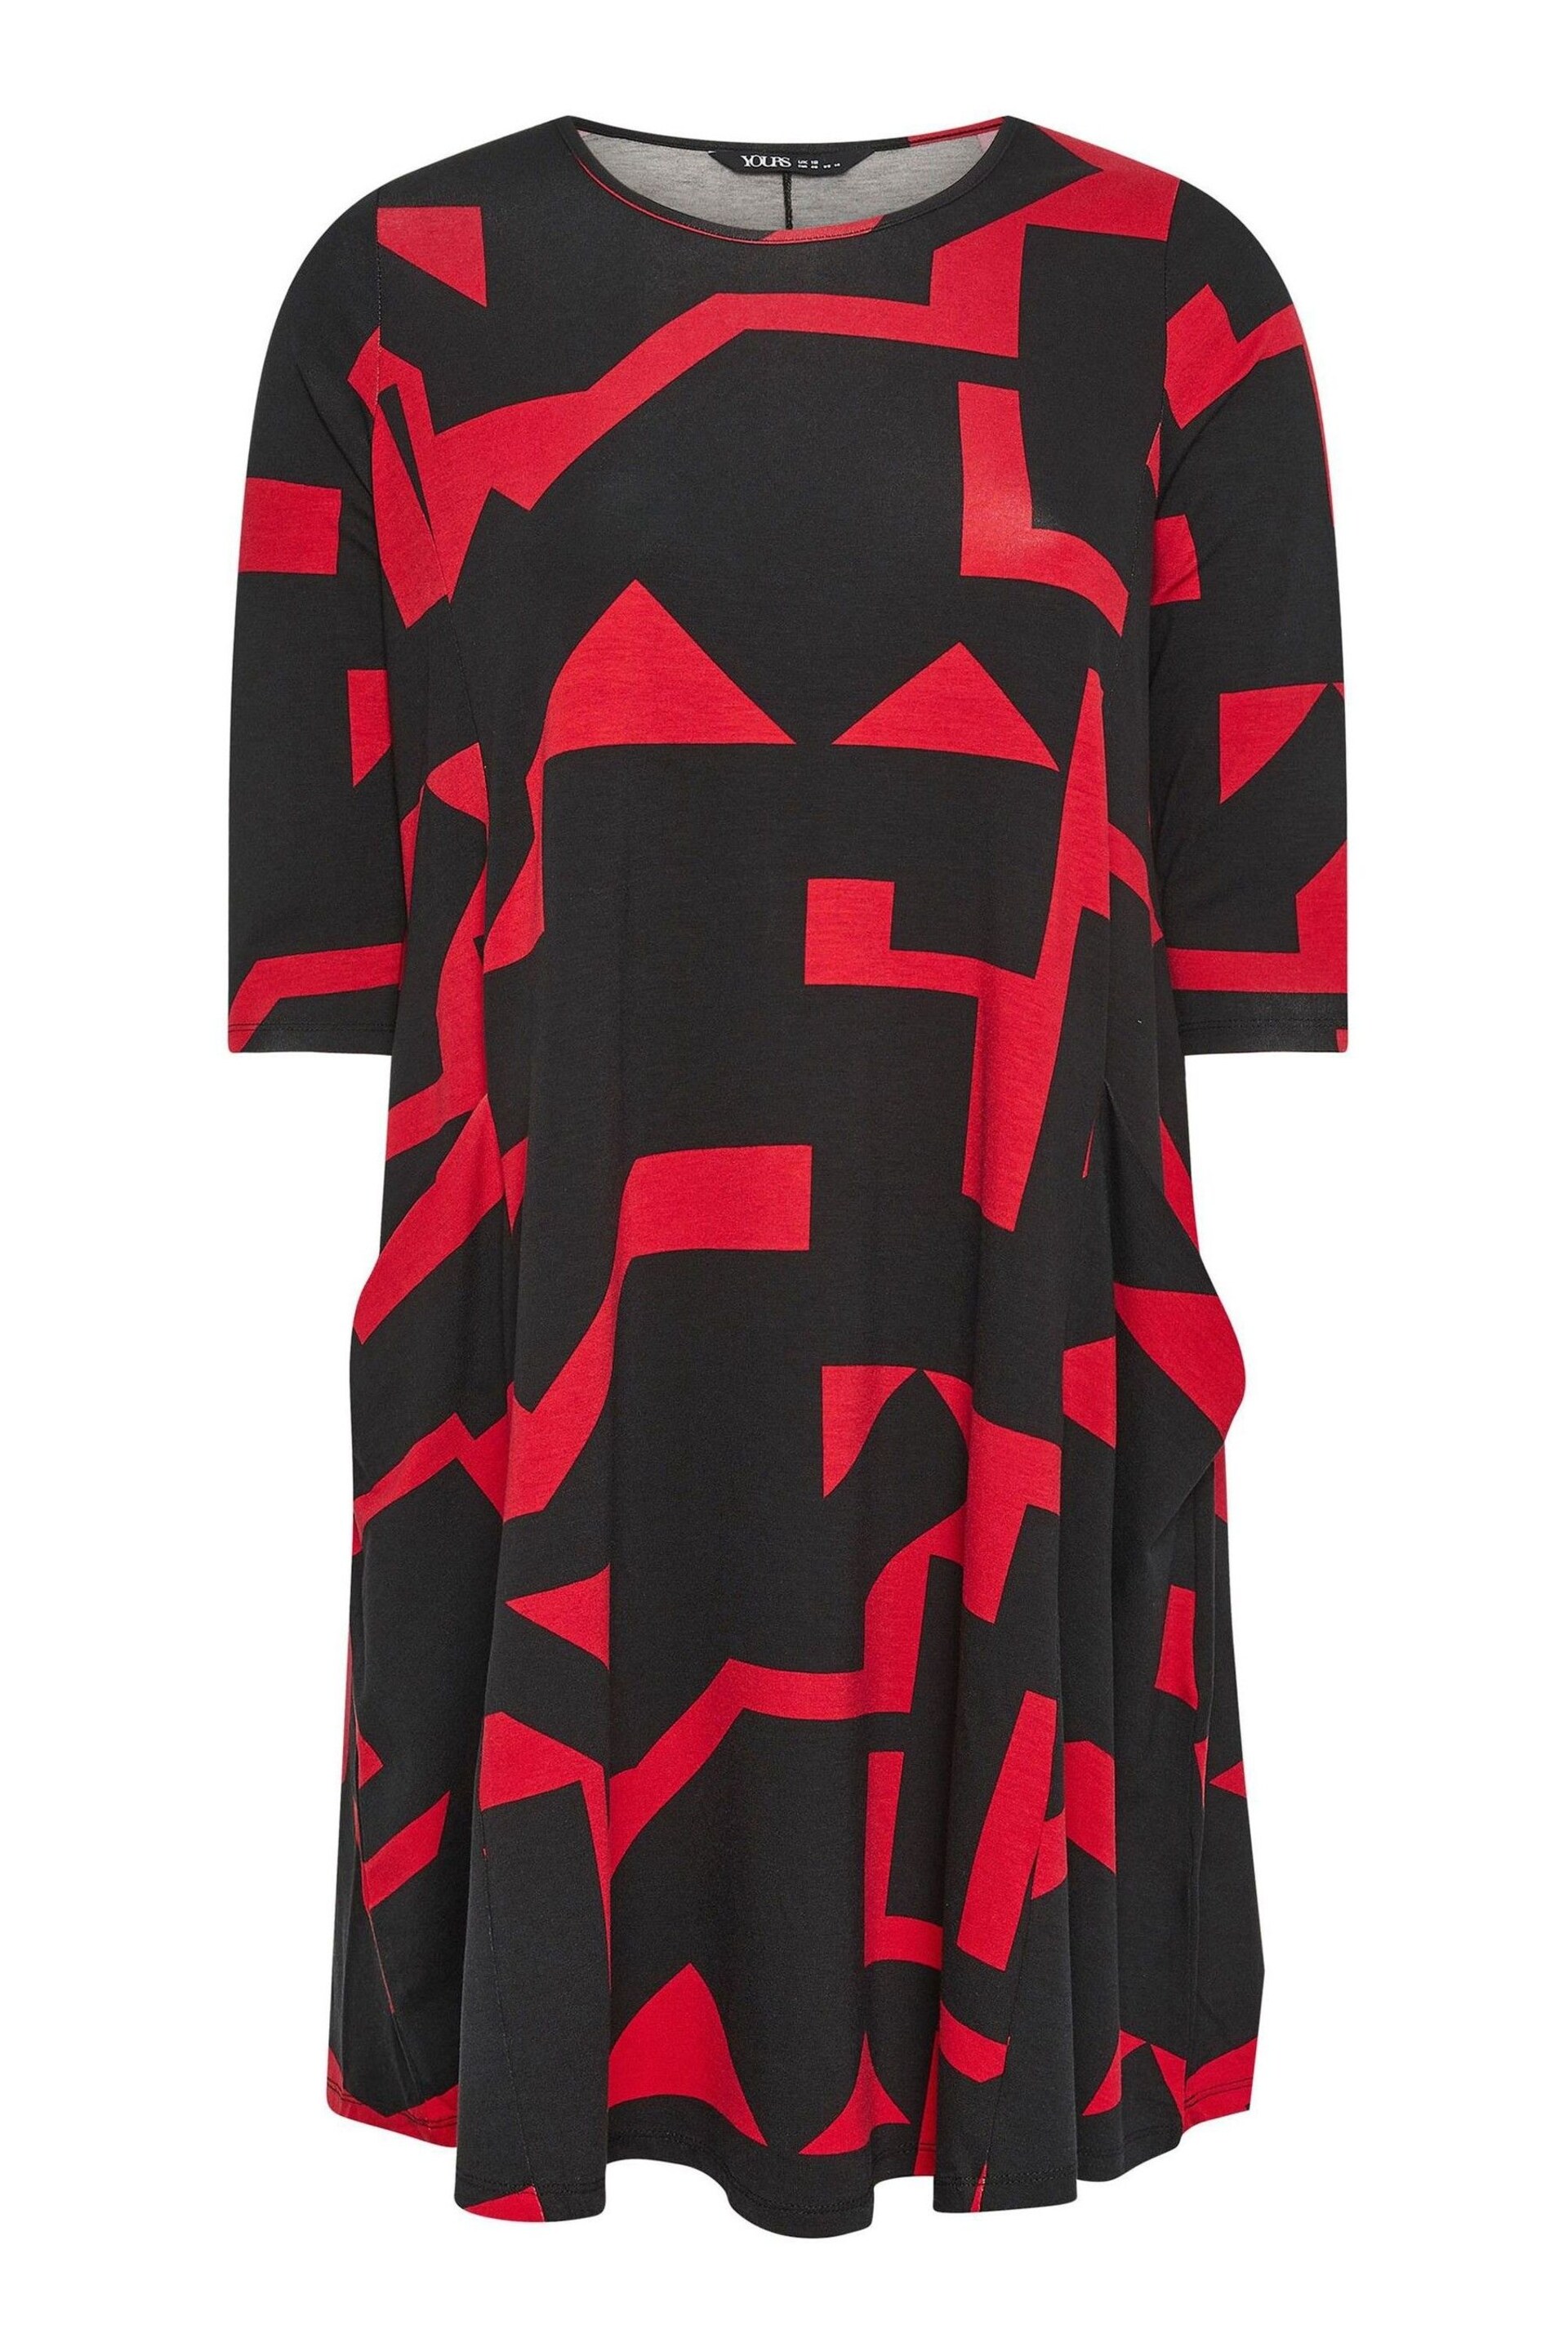 Yours Curve Black Abstract Print Pocket Dress - Image 5 of 5